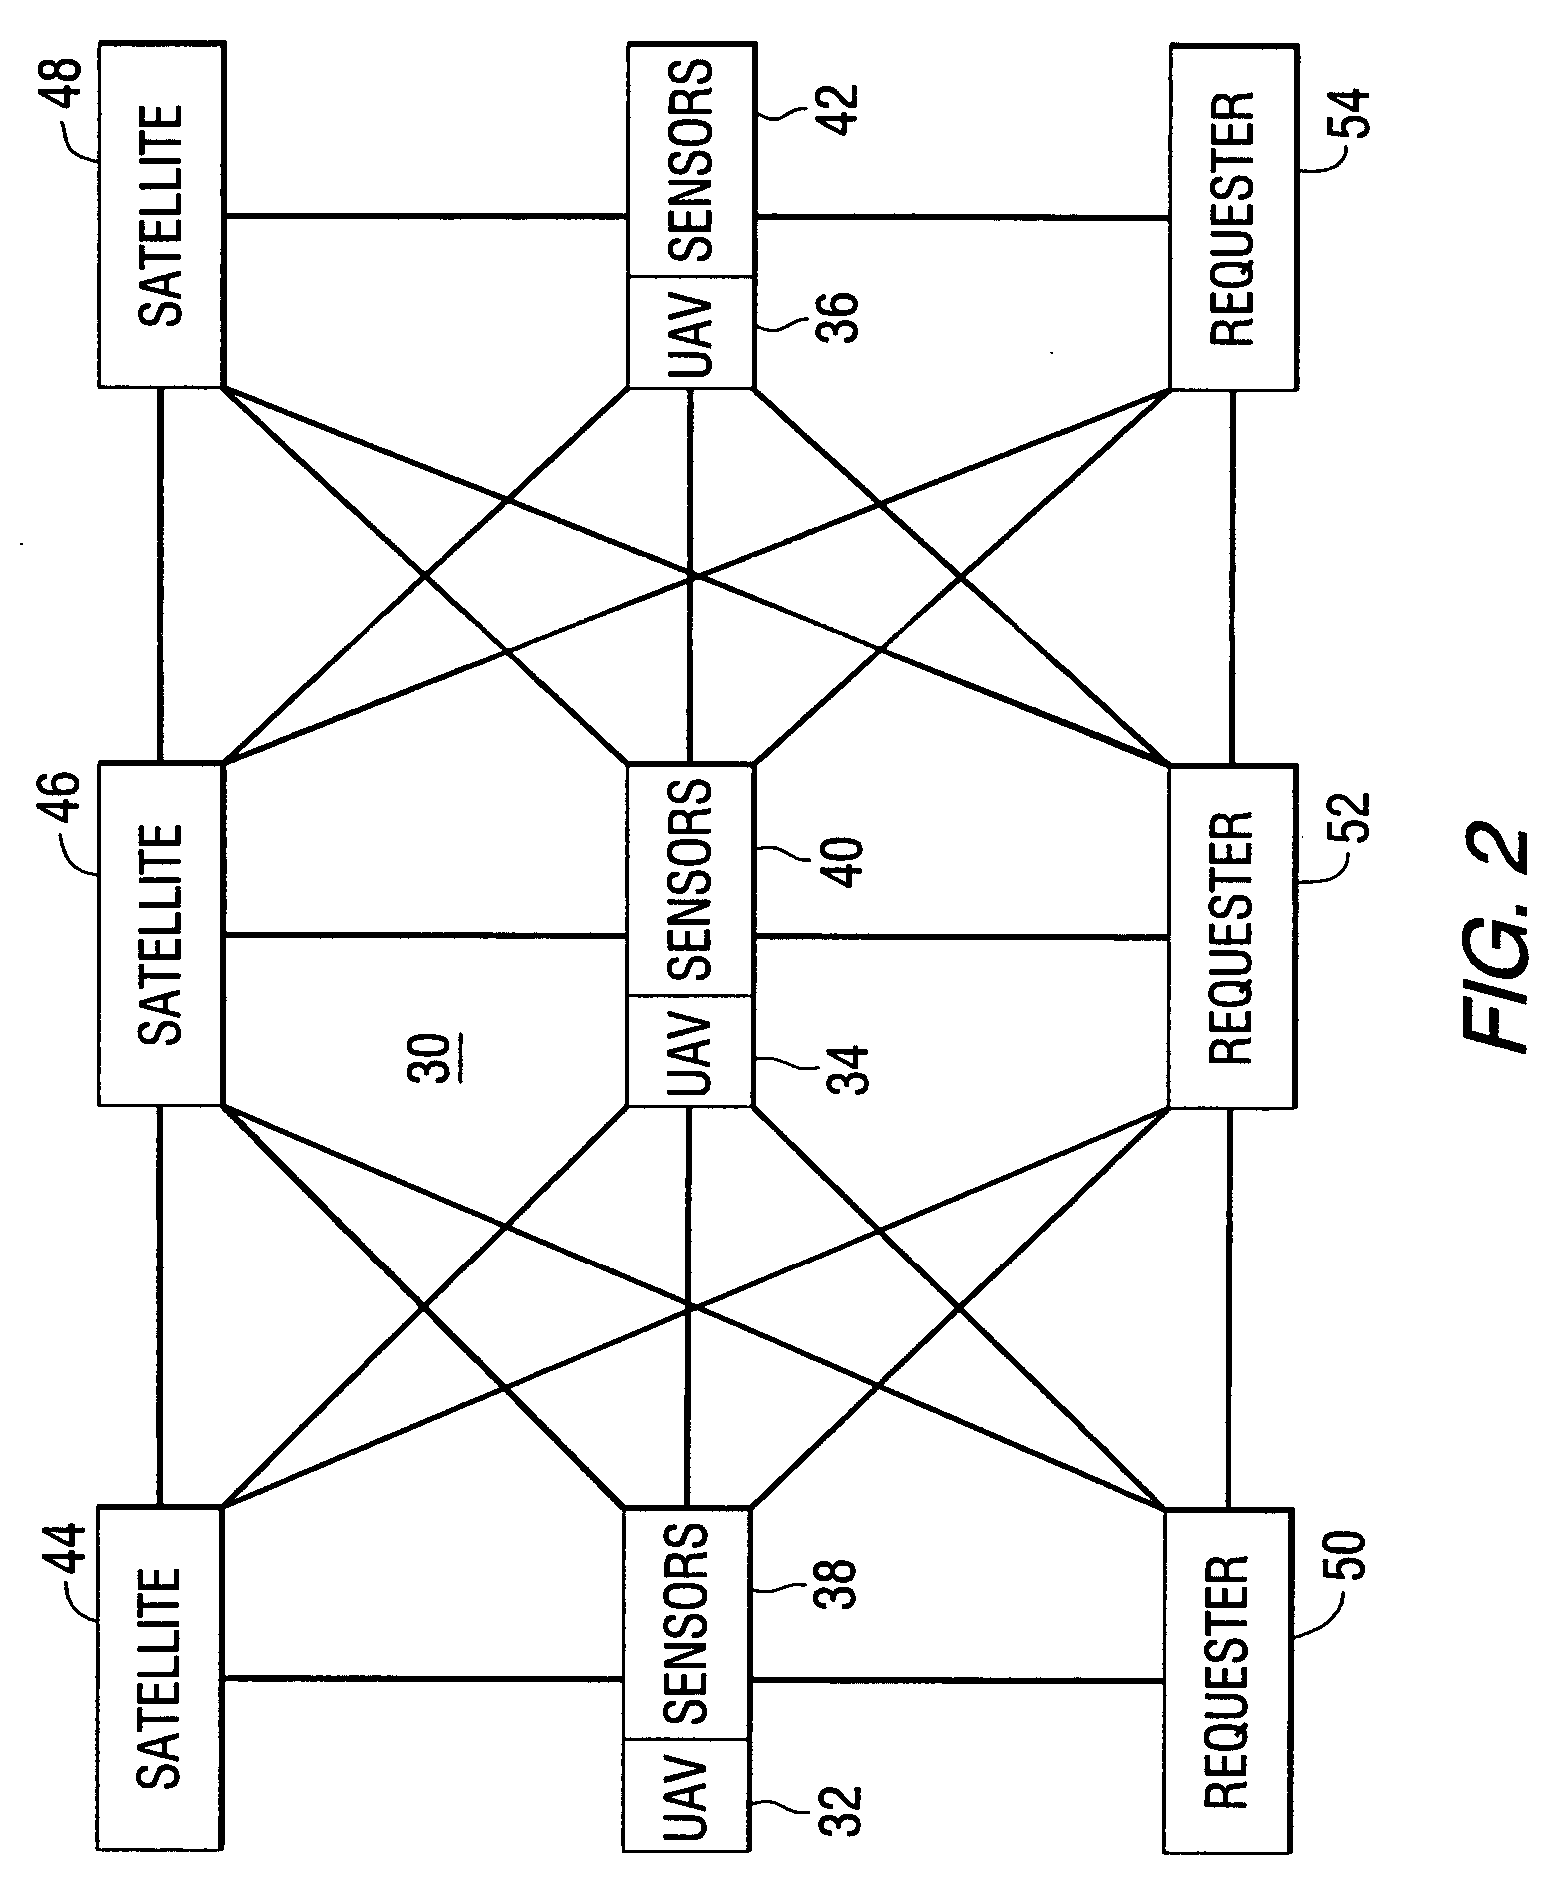 Method and apparatus for collaborative aggregate situation awareness